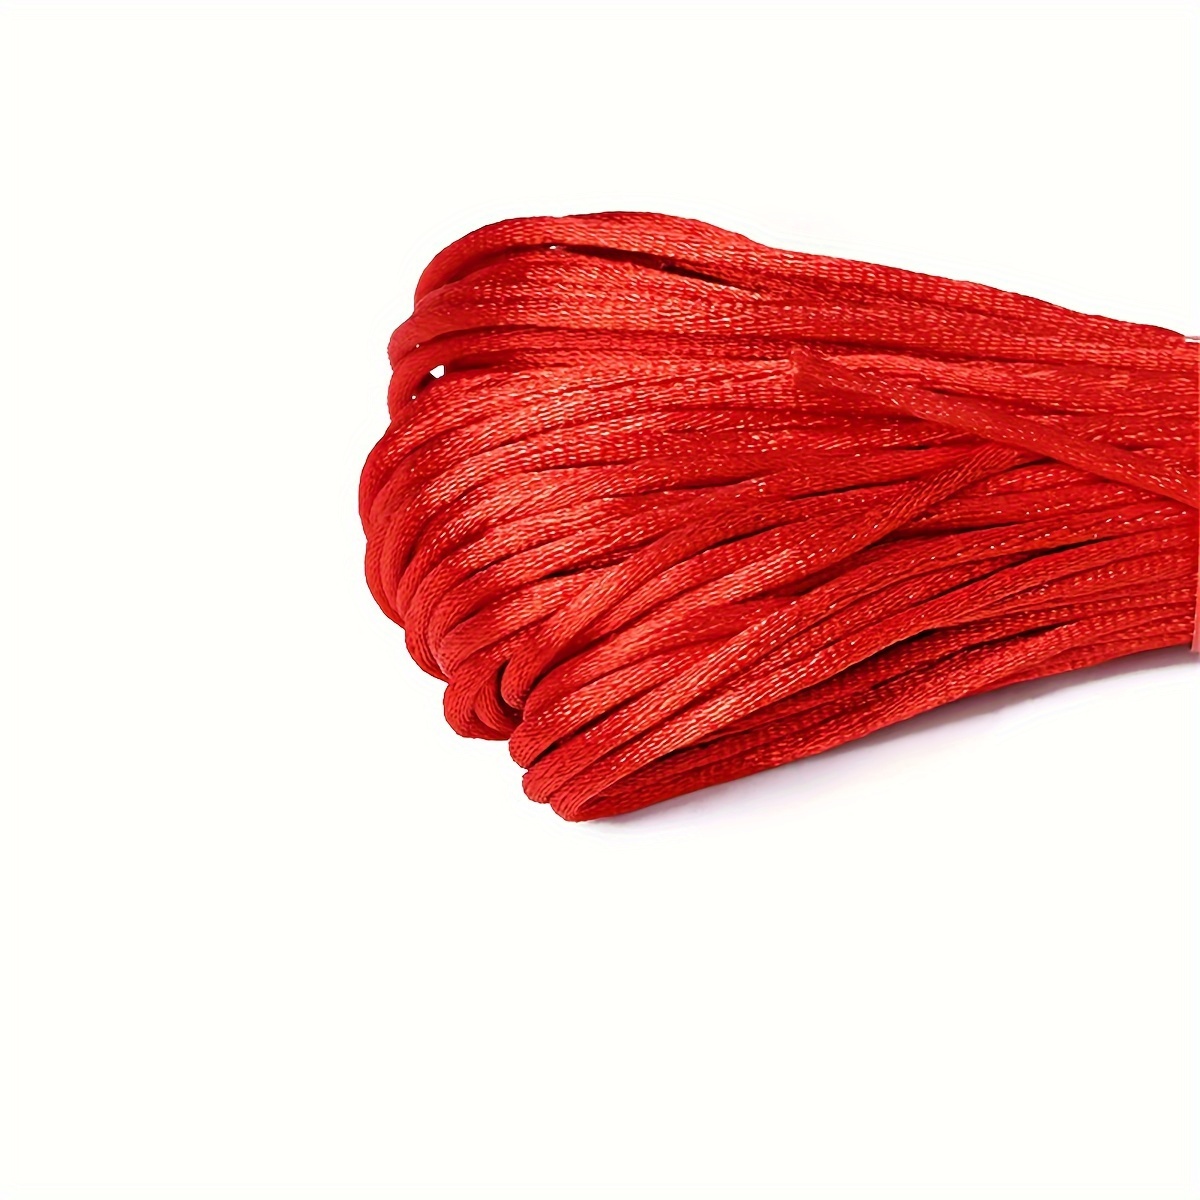 Unique Bargains Family Nylon Diy Art Craft Braided Chinese Knot Cord String Rope Red 153 Yards Red